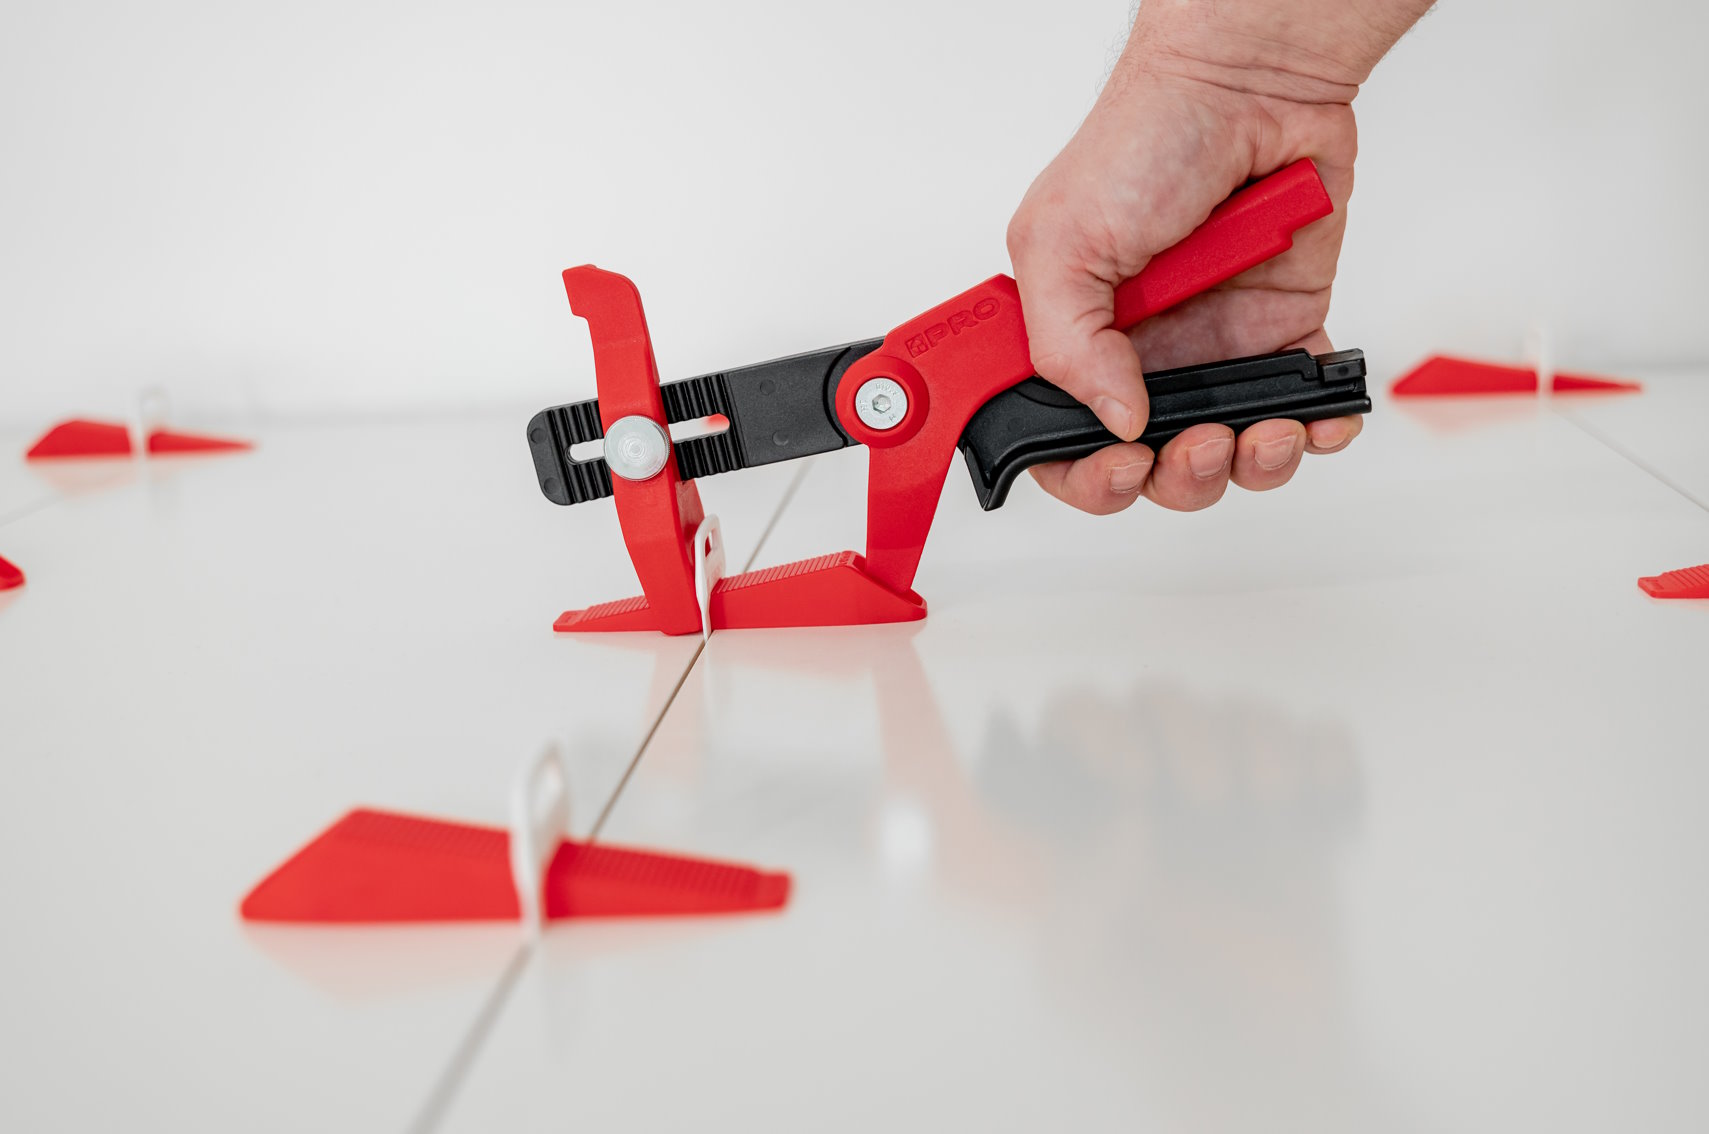 Tile leveling system – which to choose? We advise!